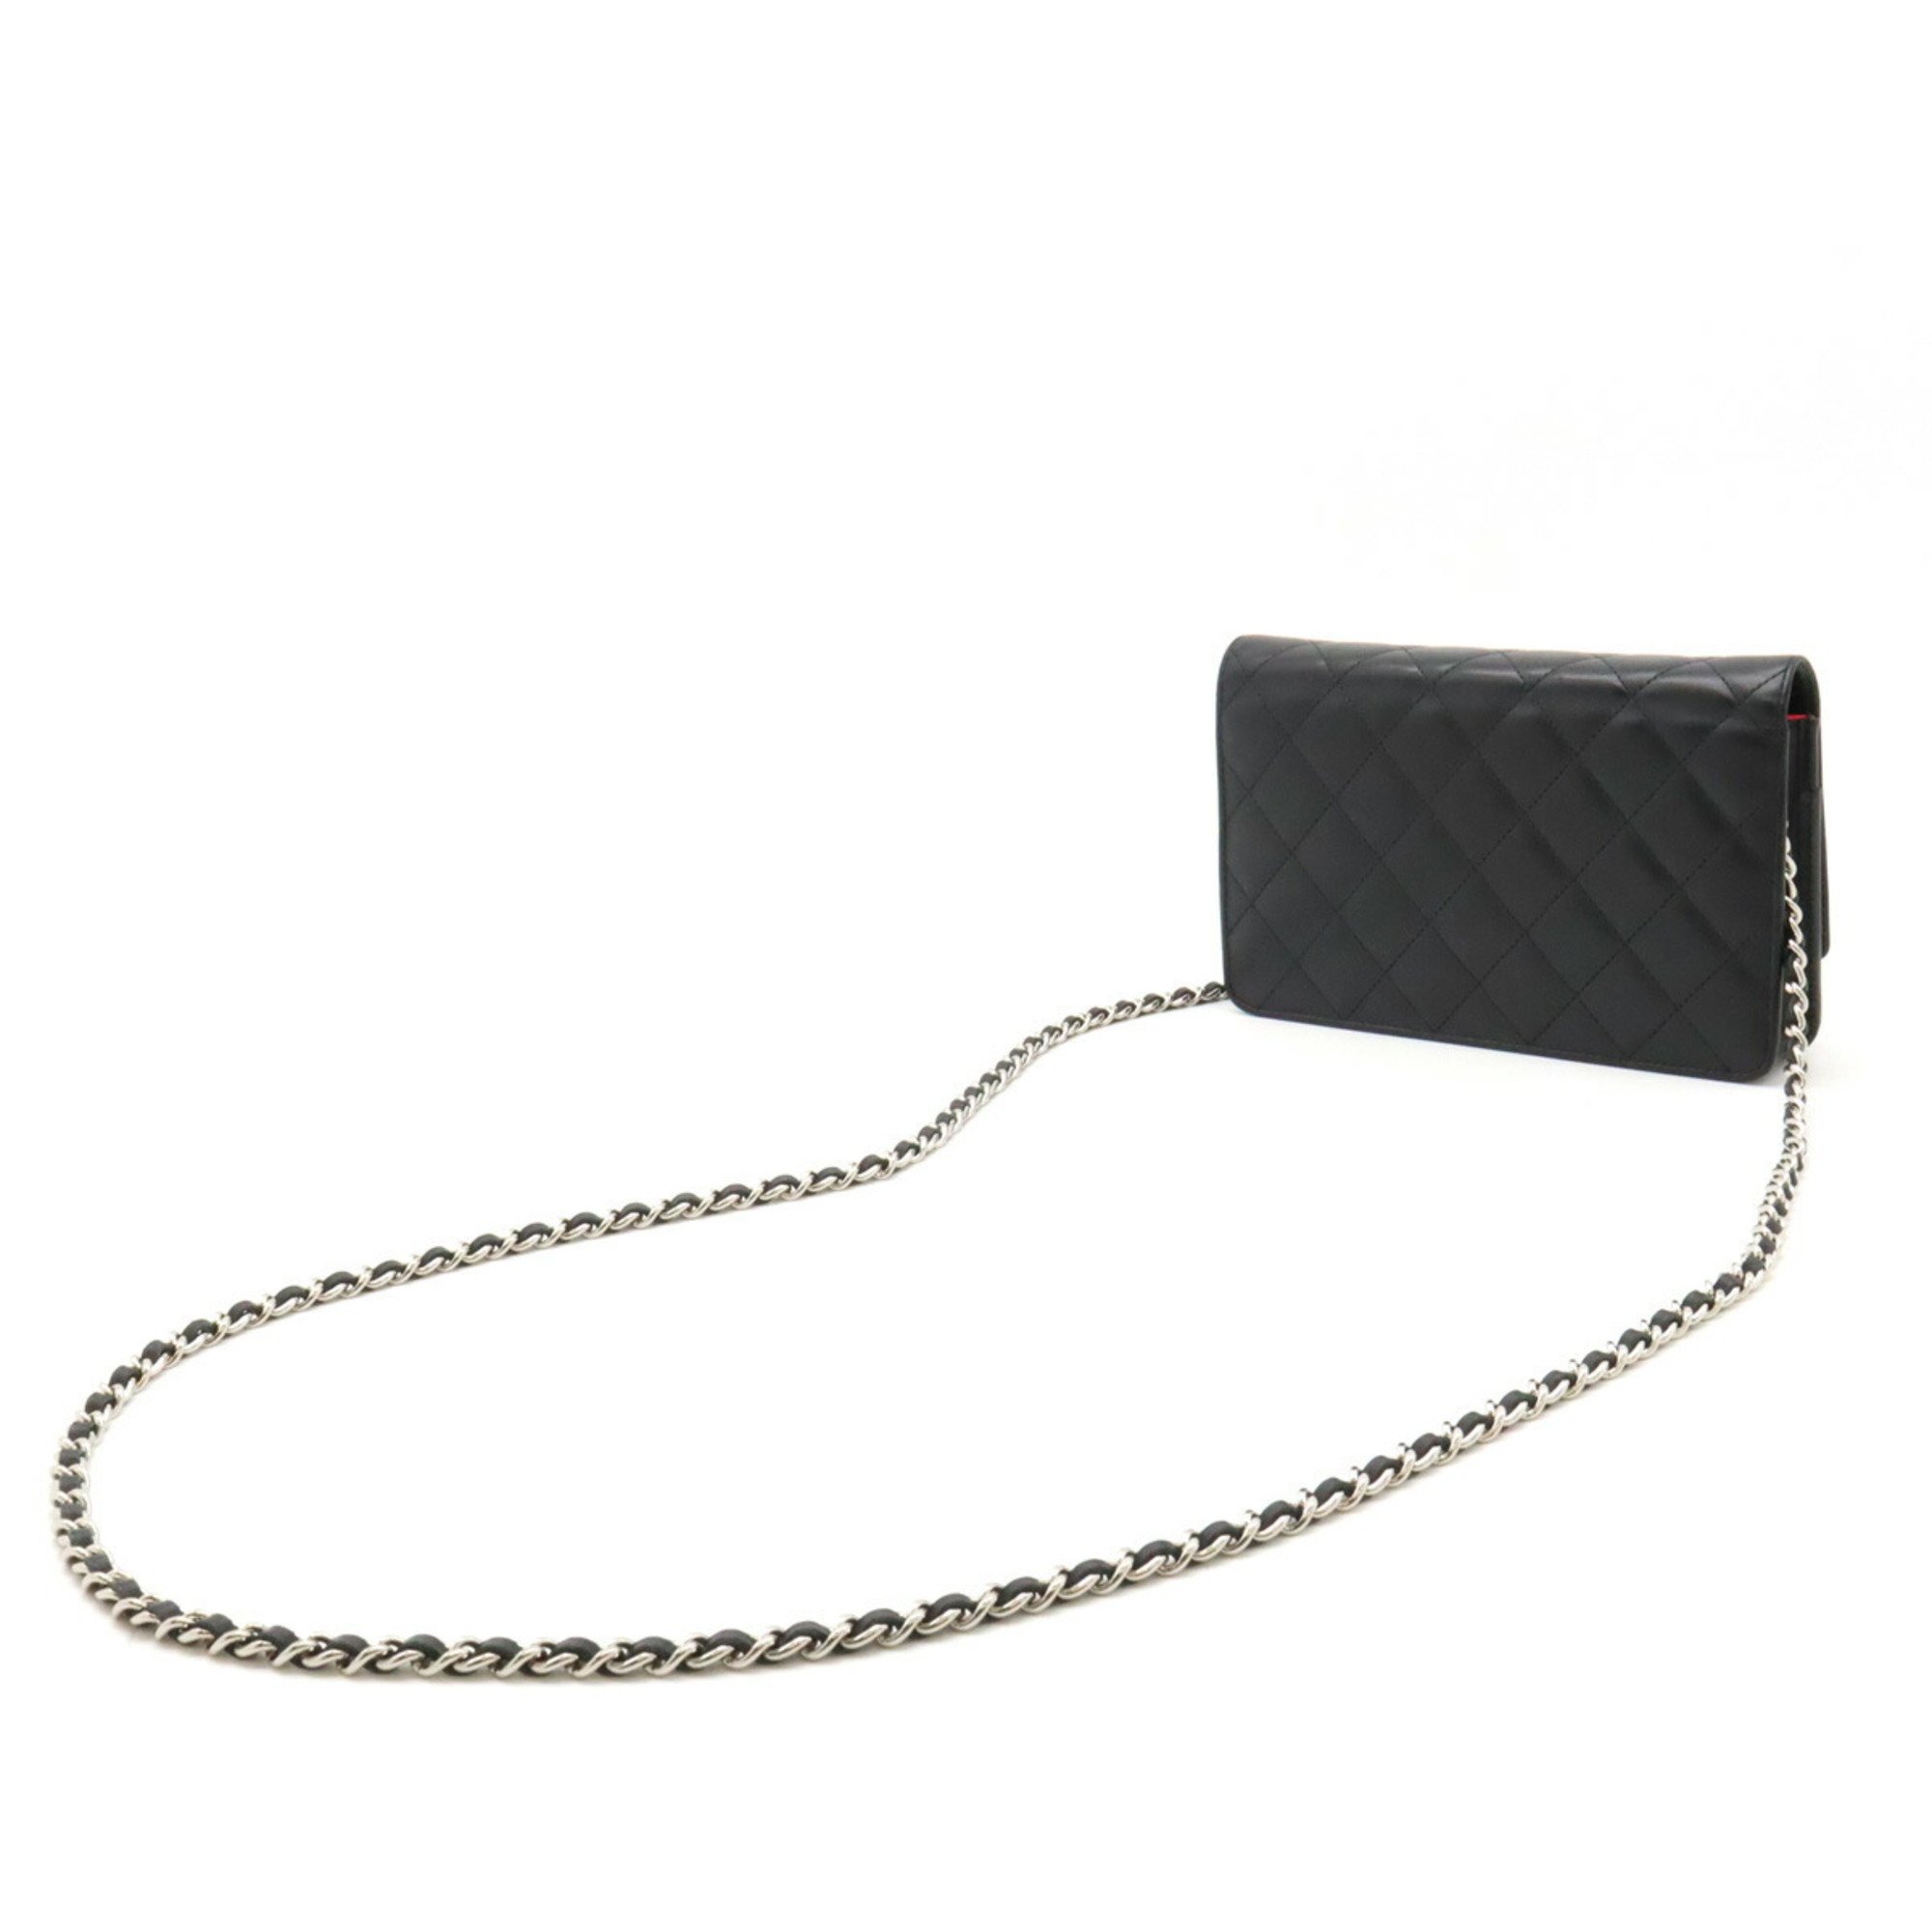 CHANEL Cambon Line Chain Wallet Clutch Bag Calf Leather Patent Black 6646